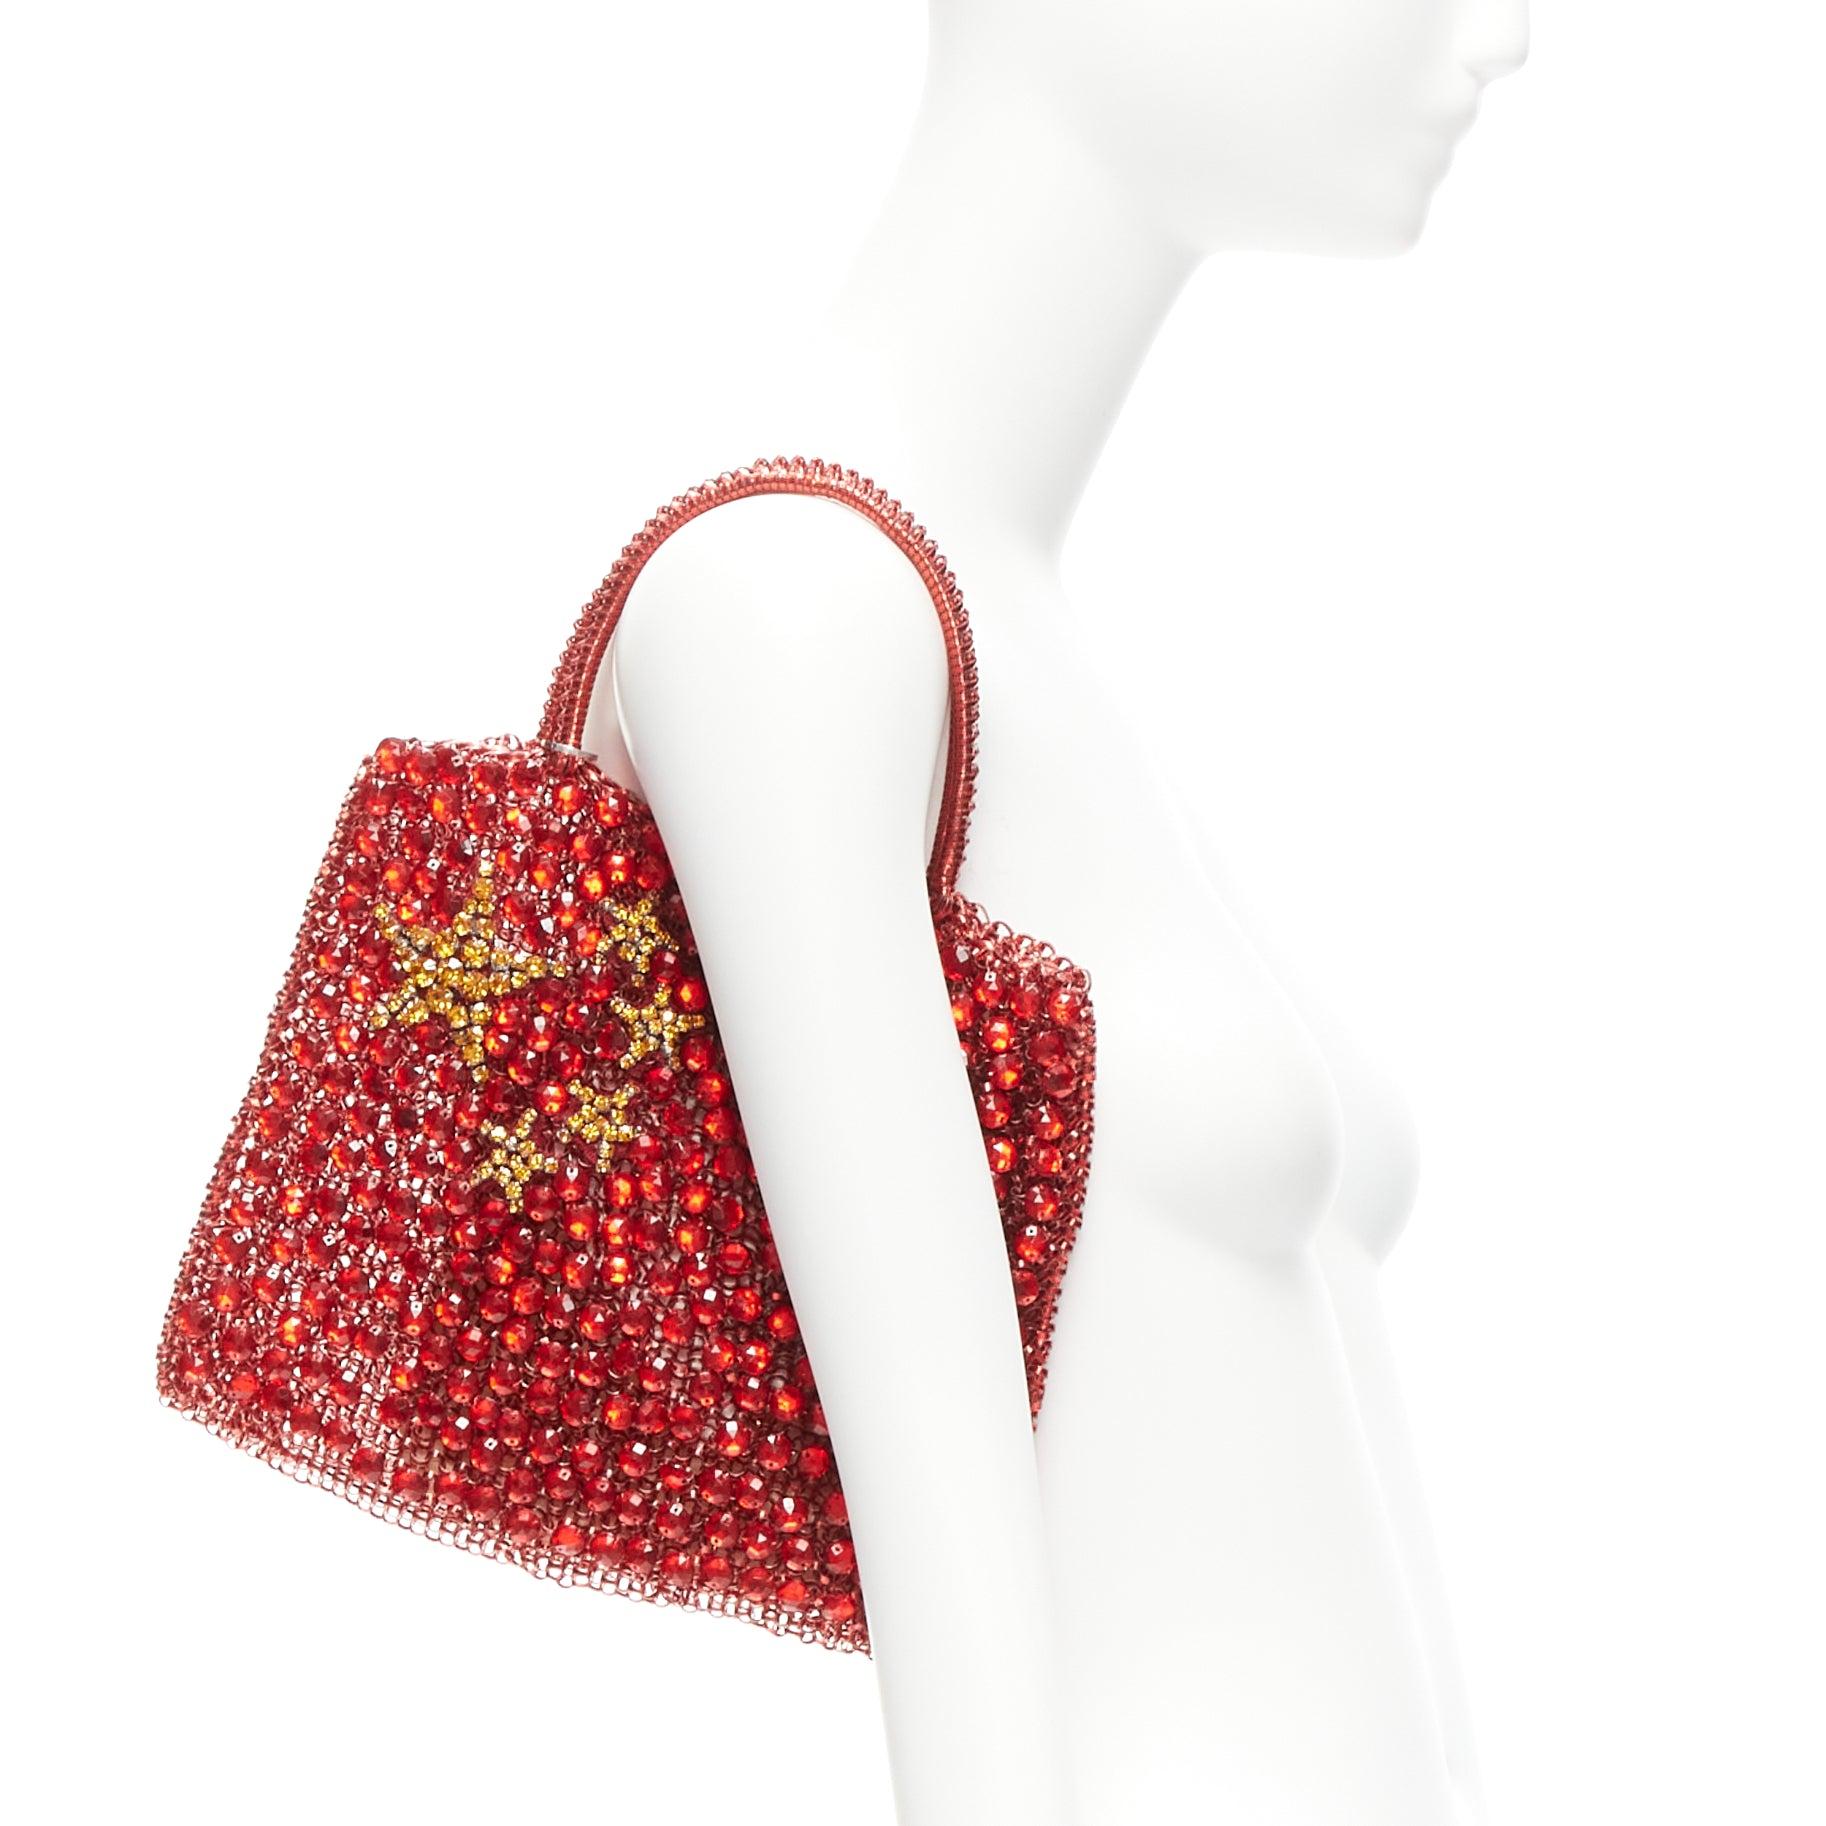 rare ANTEPRIMA Wire Bag Olympics China Flag red gold crystals tote
Reference: ANWU/A01070
Brand: Anteprima
Collection: Wire Bag
Material: Plastic
Color: Red, Gold
Pattern: Ethnic
Extra Details: 5 gold stars in crystals.

CONDITION:
Condition: